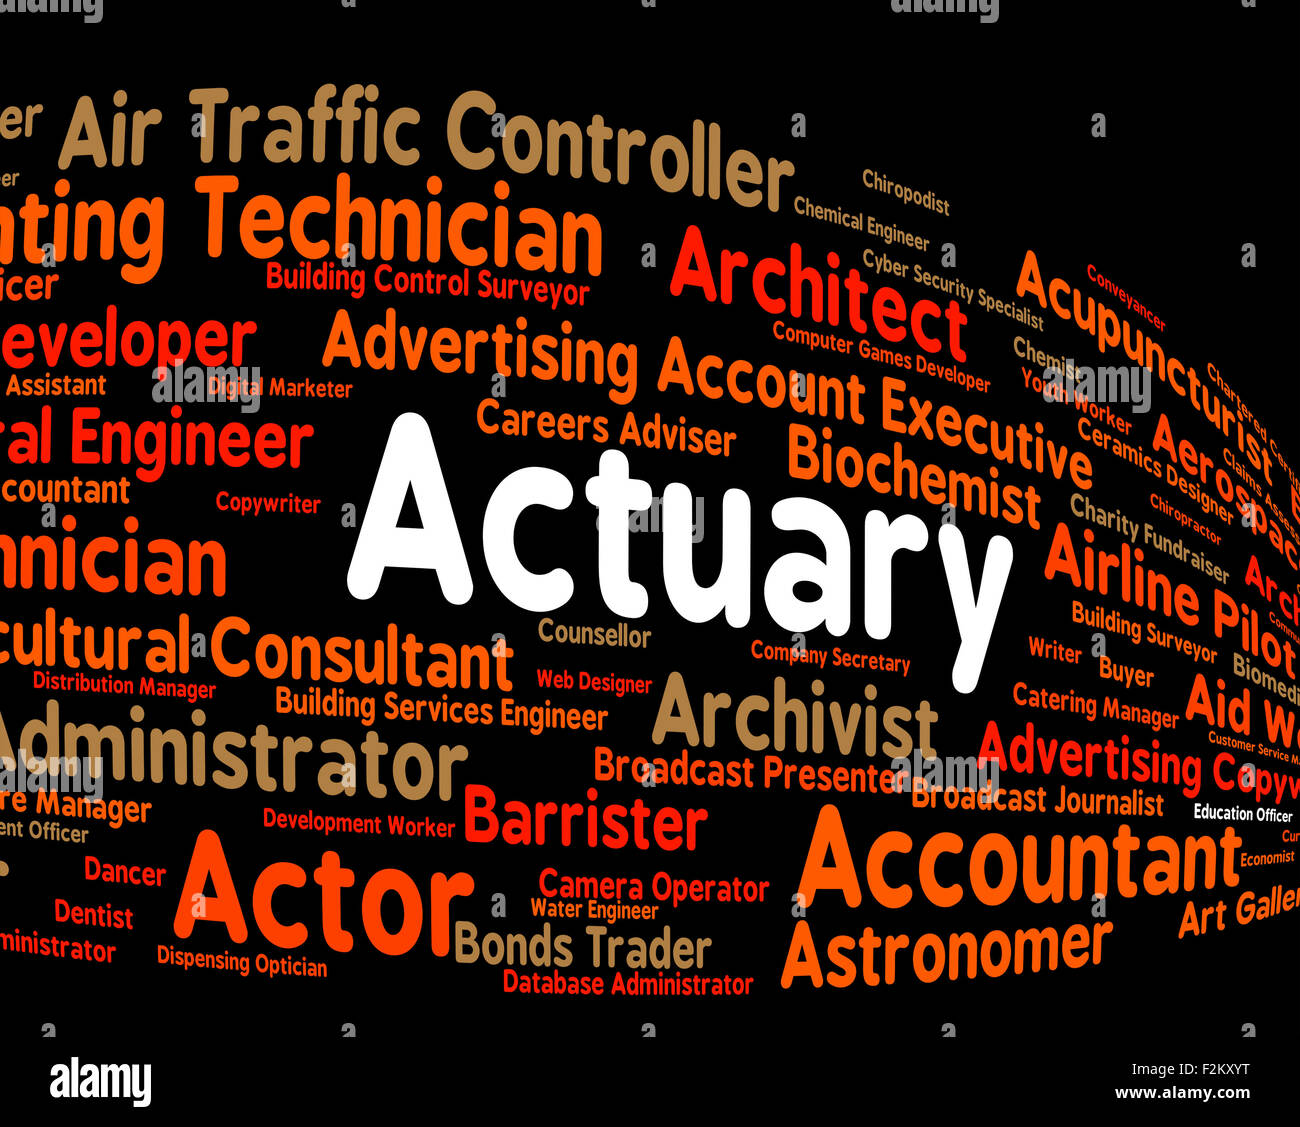 Actuary Job Indicating Actuarial Science And Recruitment Stock Photo - Alamy